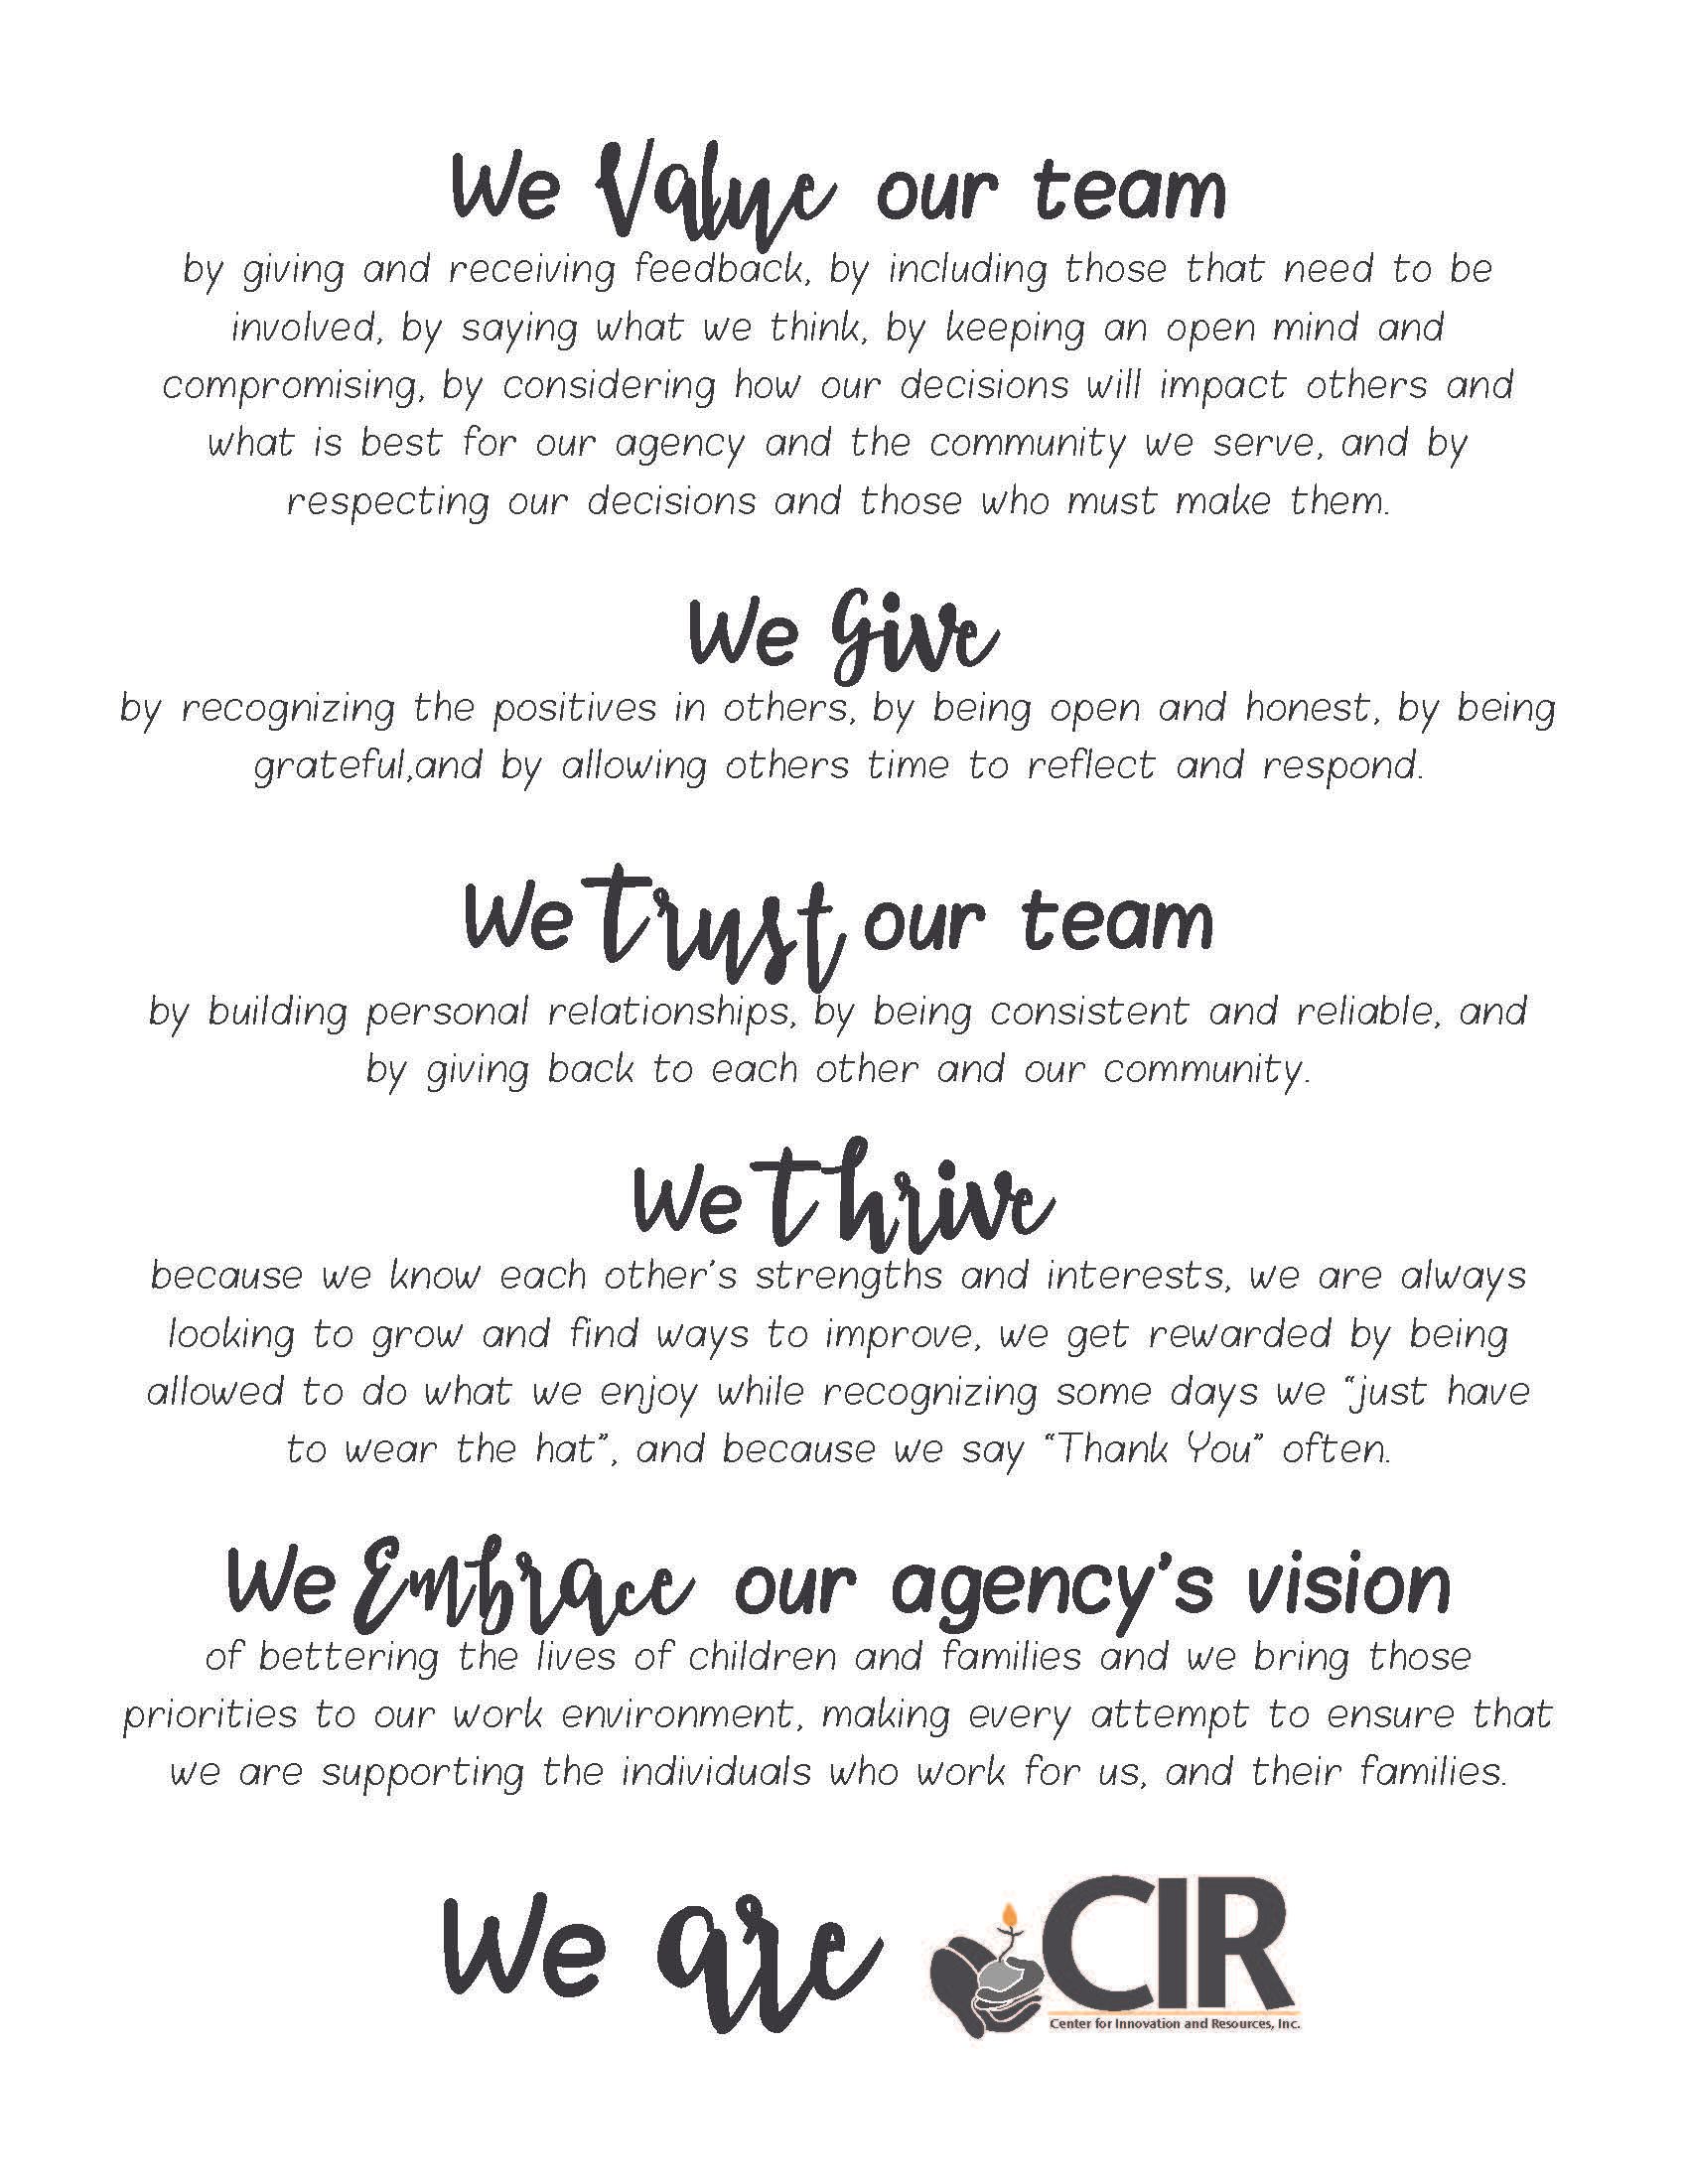 Description of the CIR team and our vision